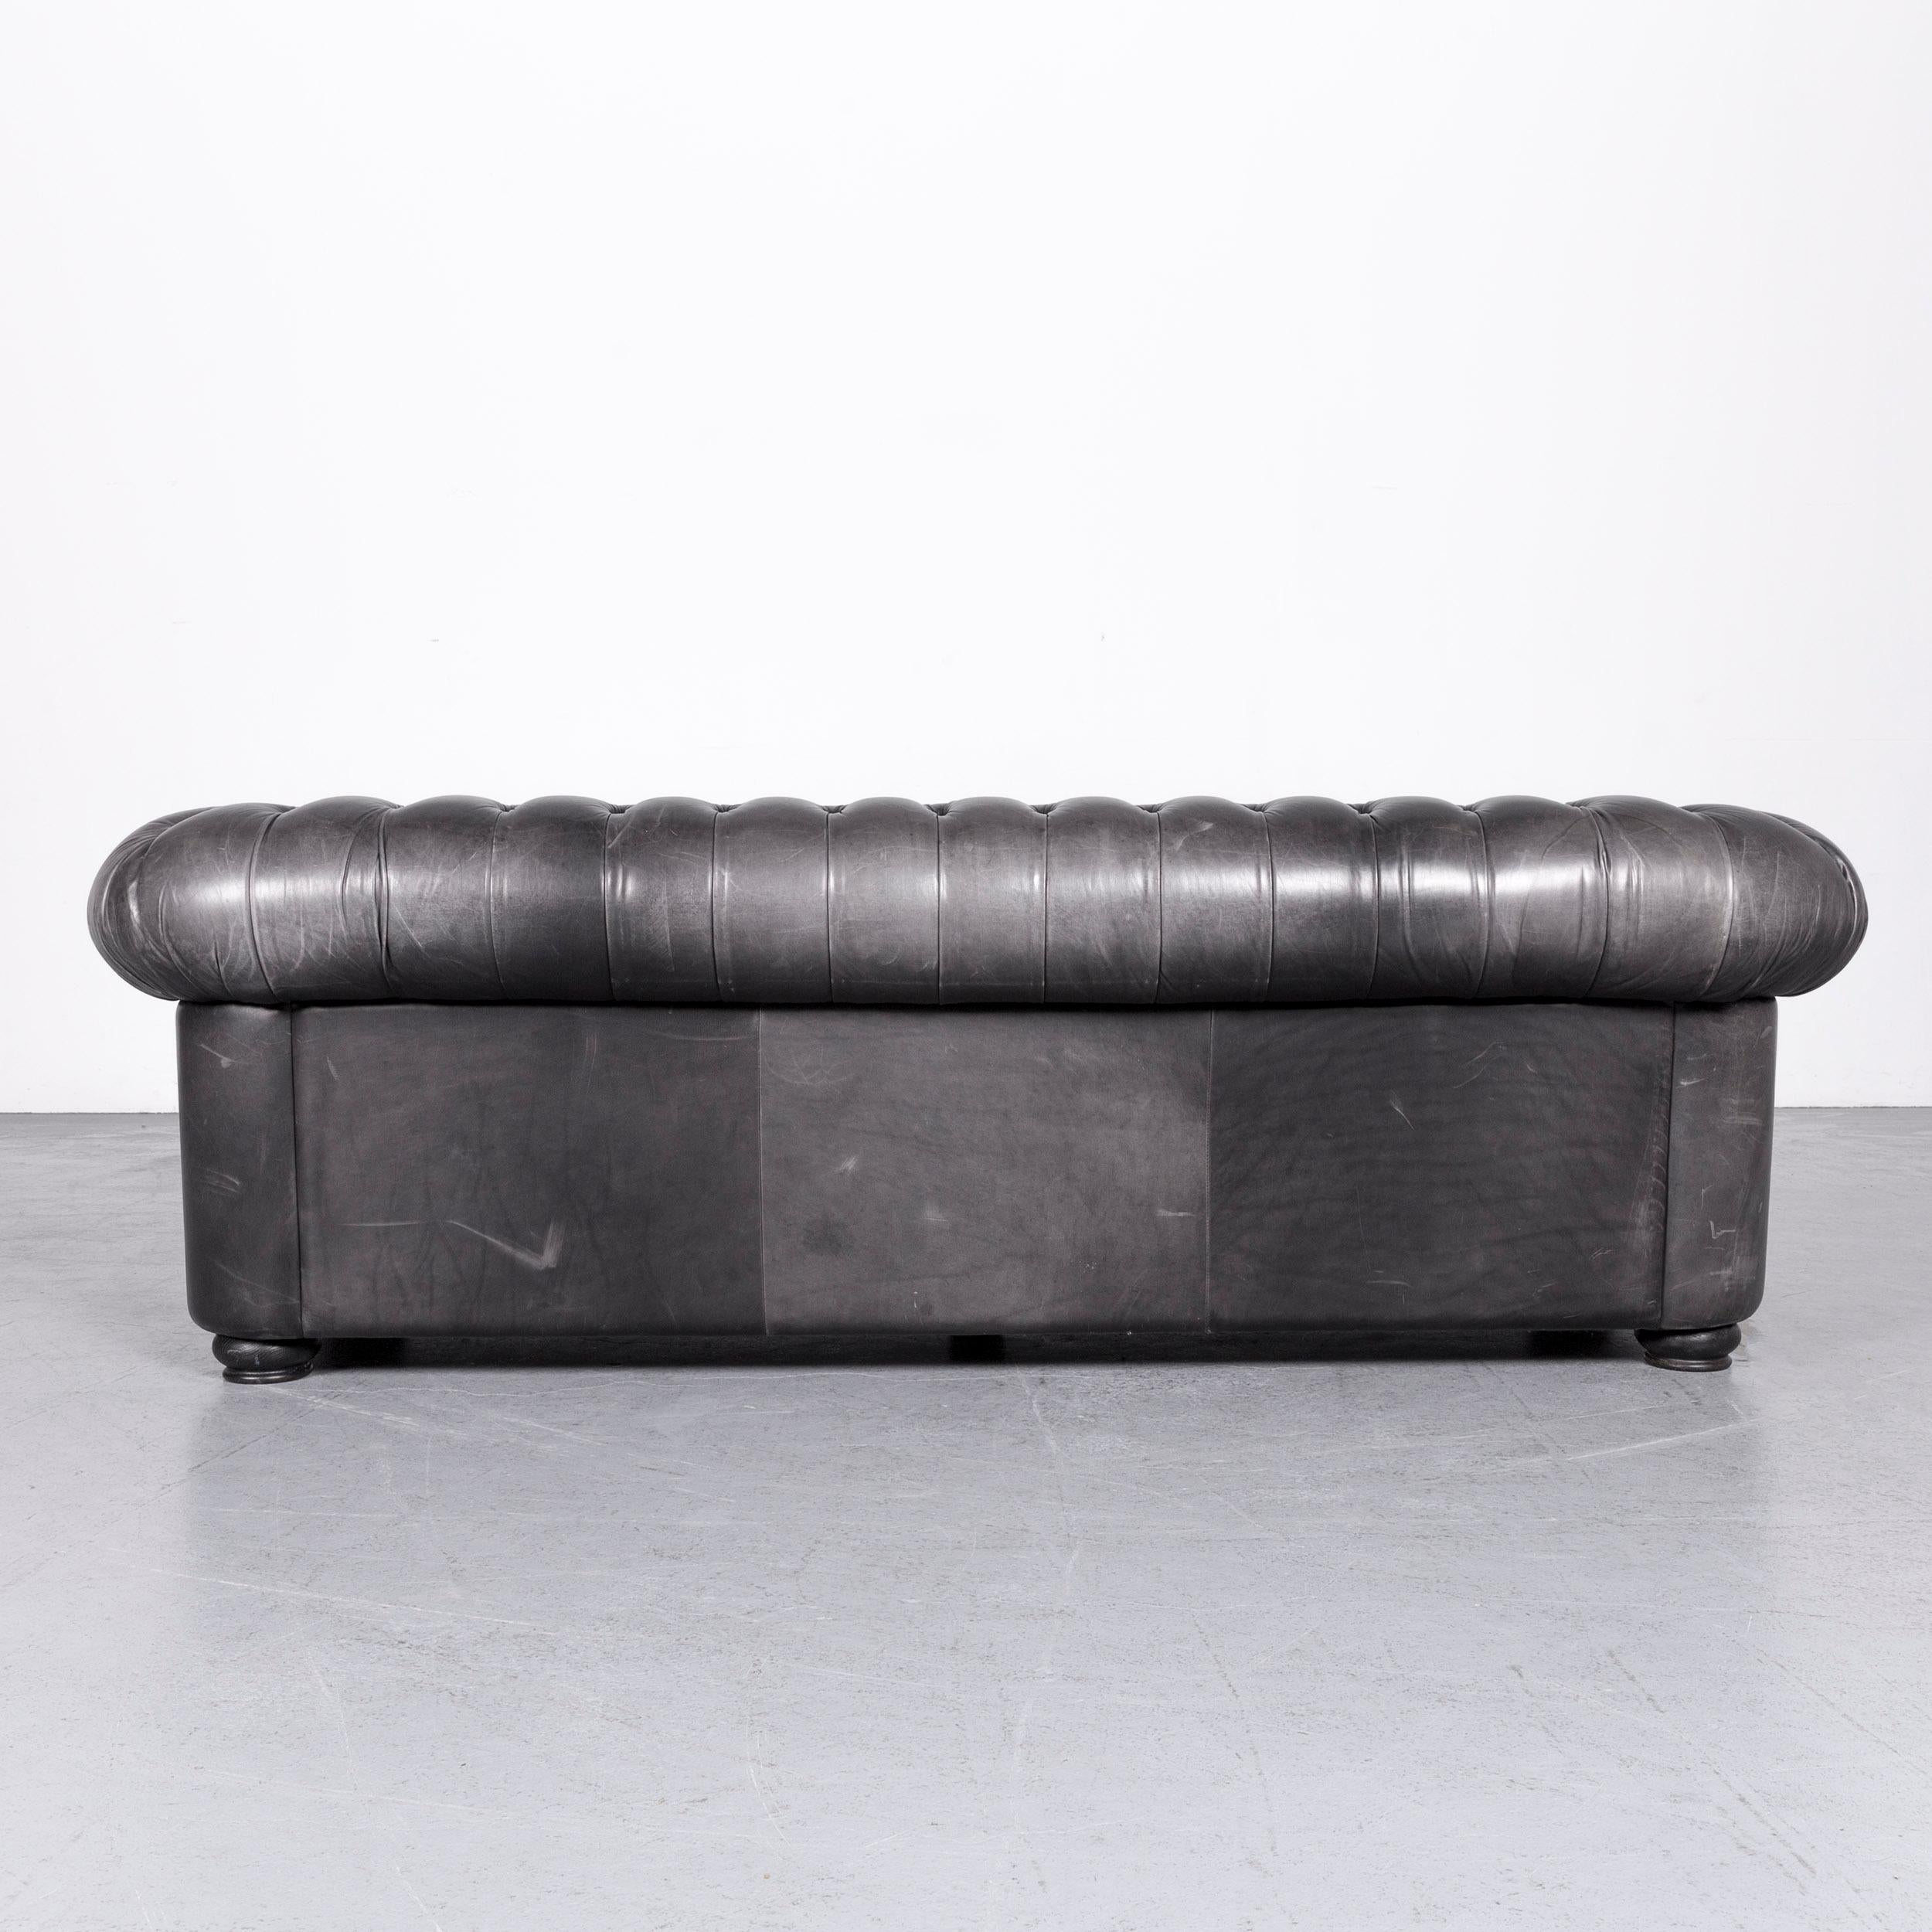 Natuzzi King Designer Leather Sofa Three-Seat Couch Black in Chesterfield Style 2